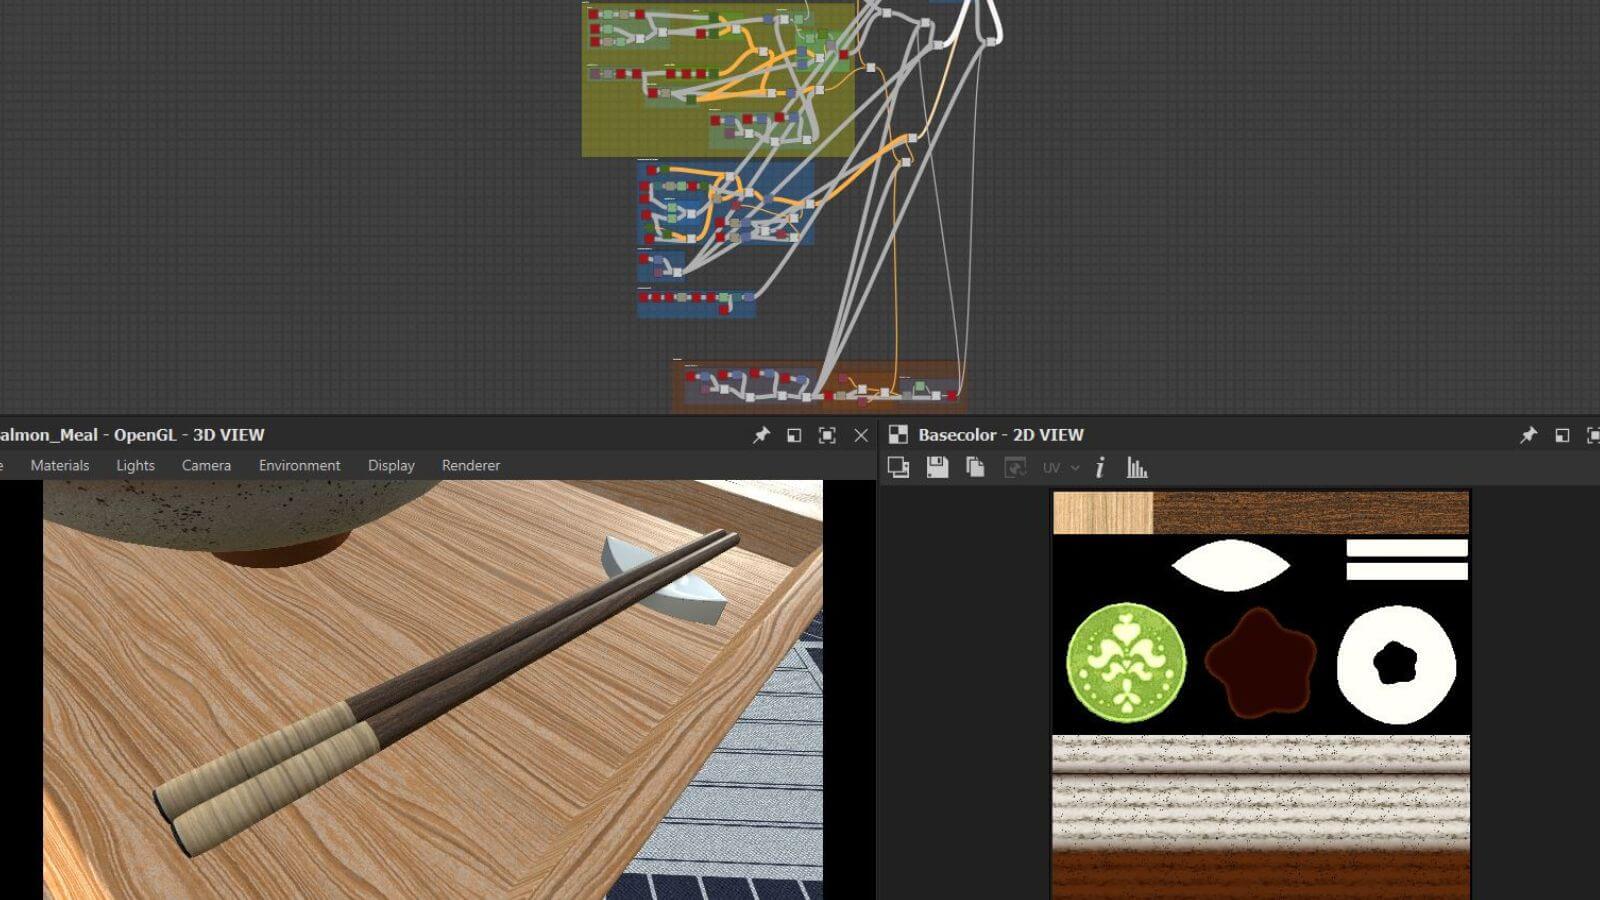 Workflow chart and close-up of chopsticks image in Substance 3D Designer